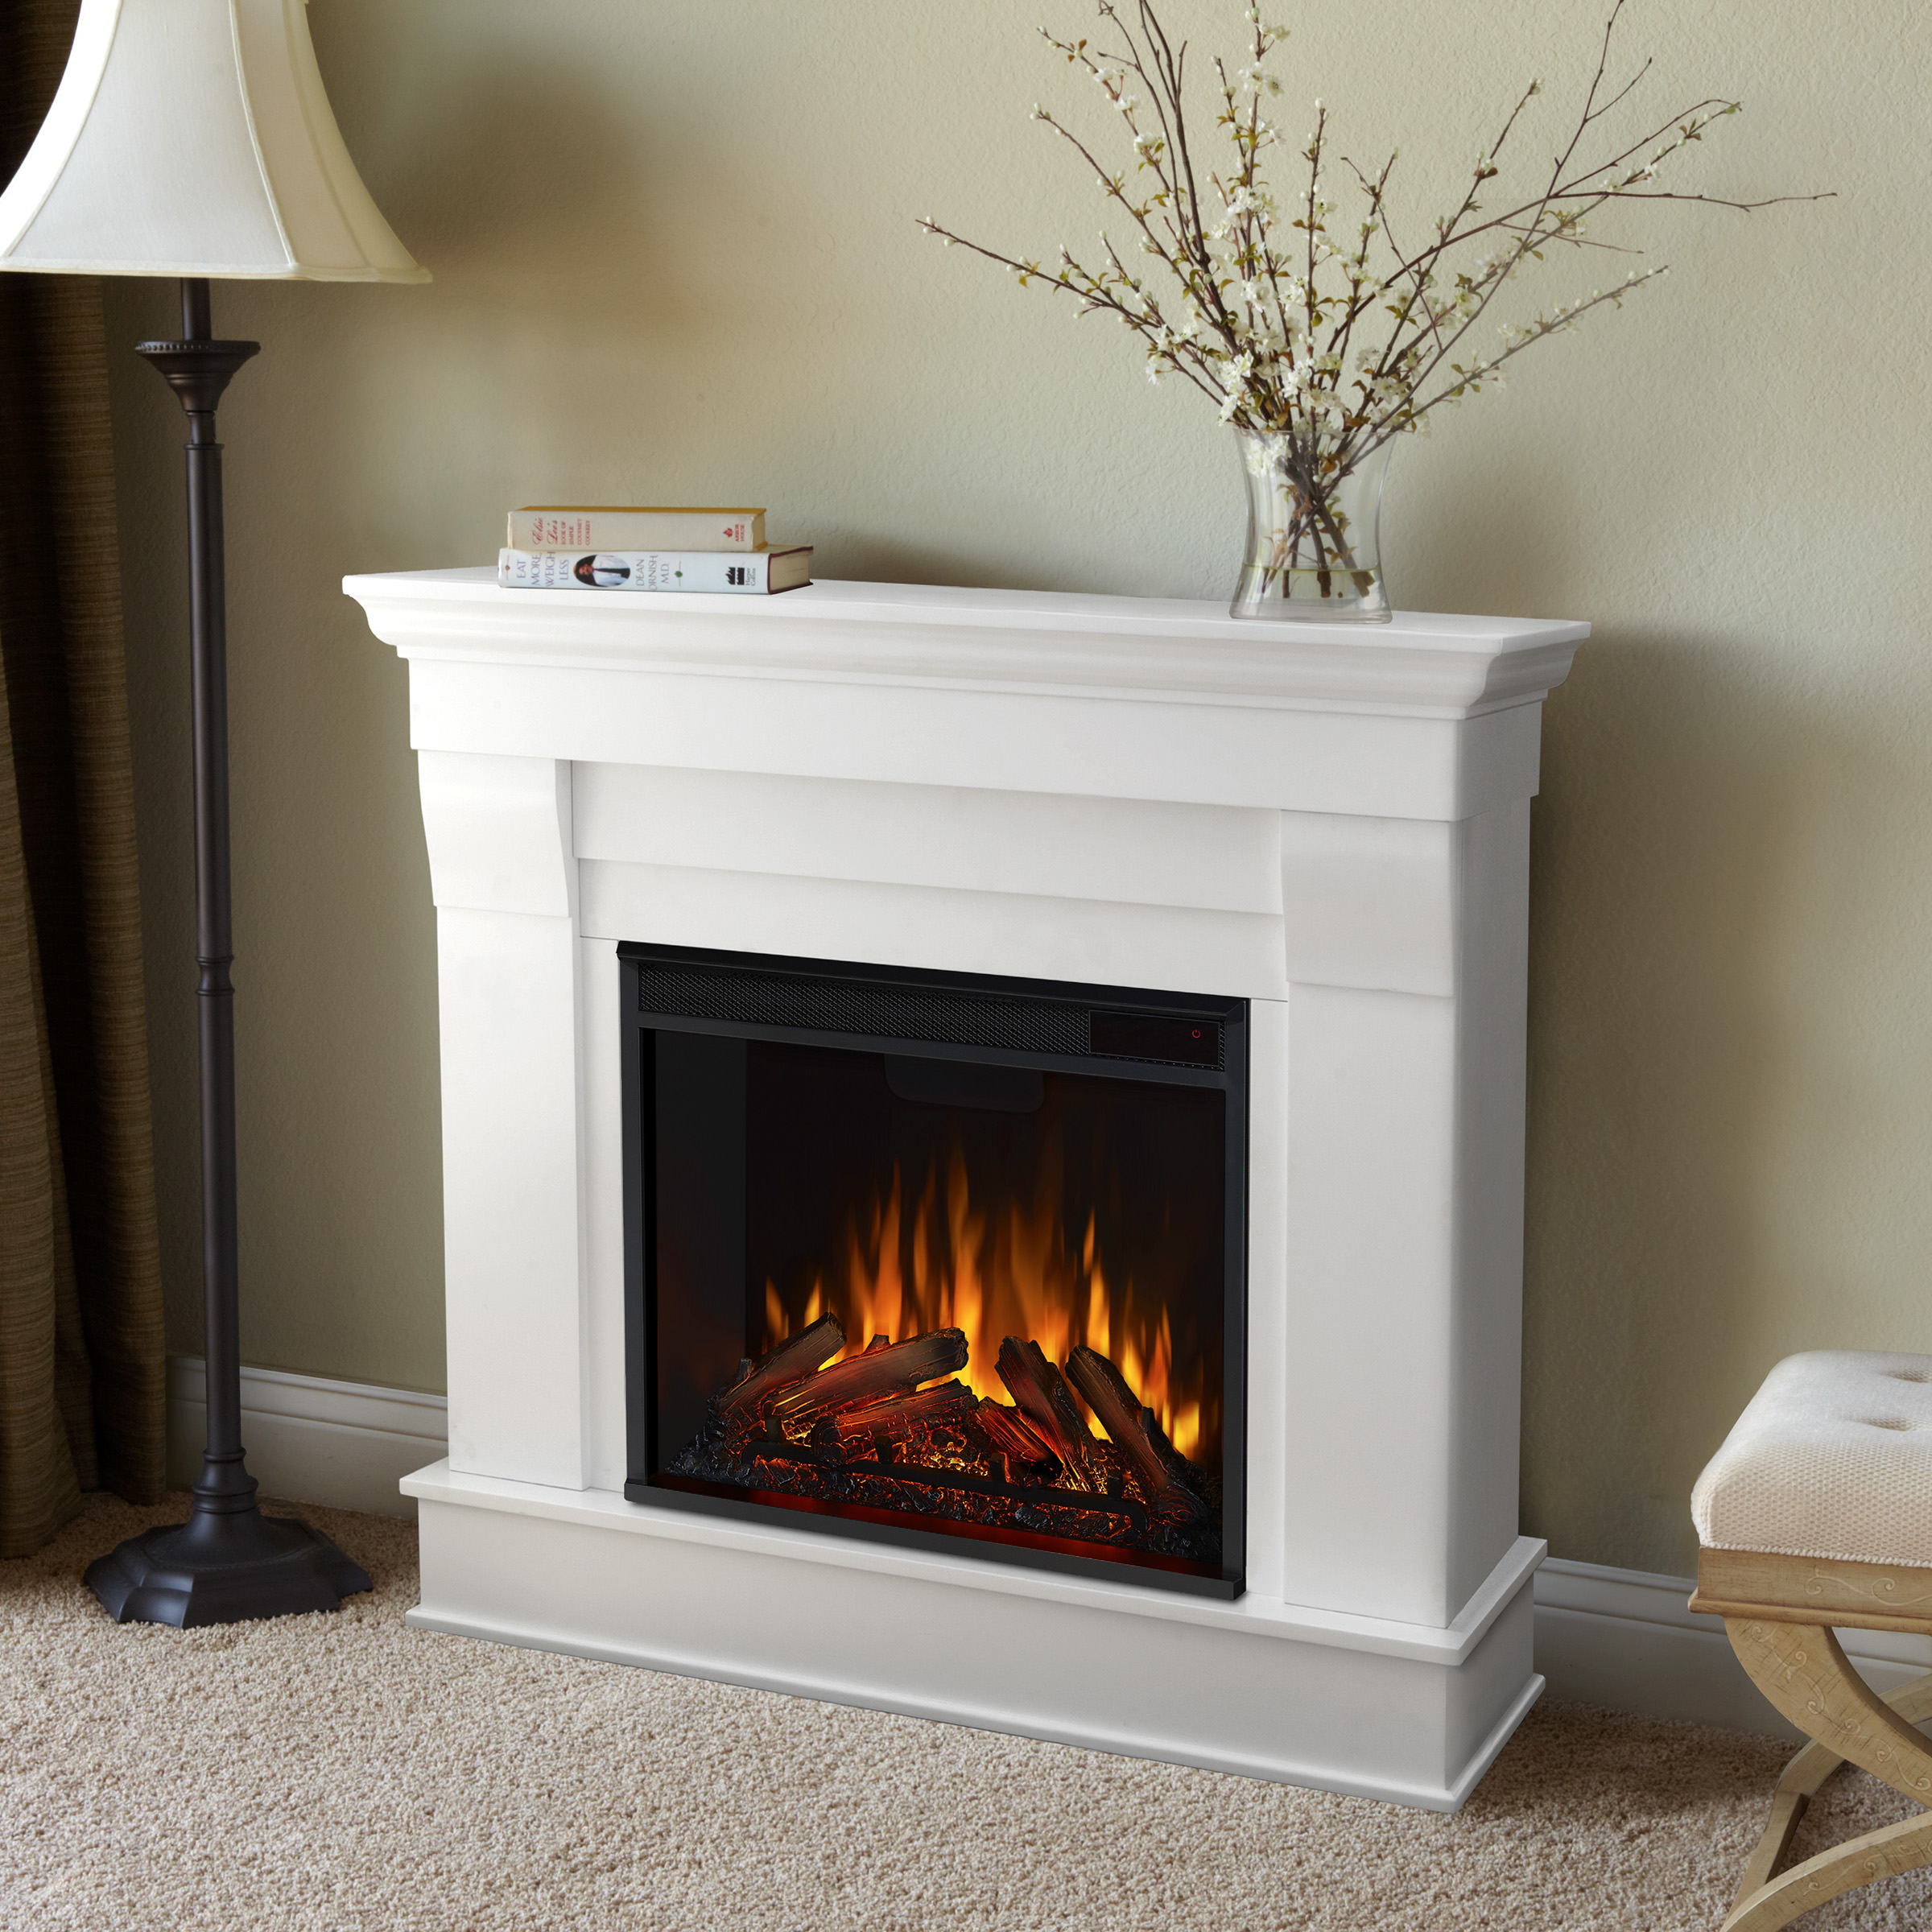 40 94 Cau White Electric Fireplace, White Tabletop Electric Fireplace